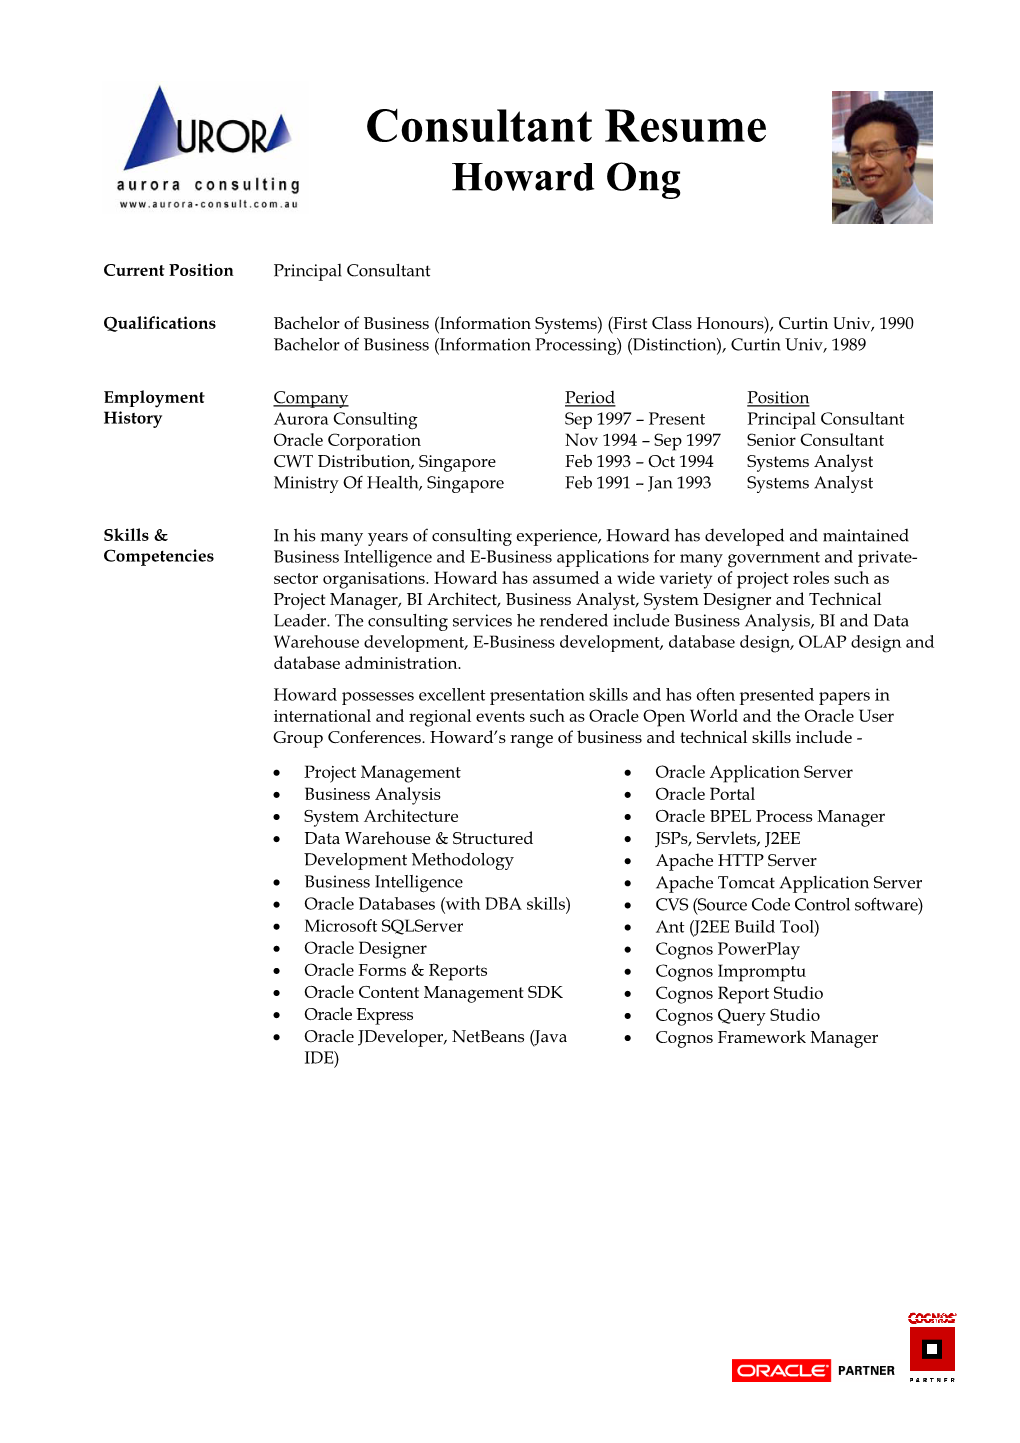 Consultant Resume Howard Ong